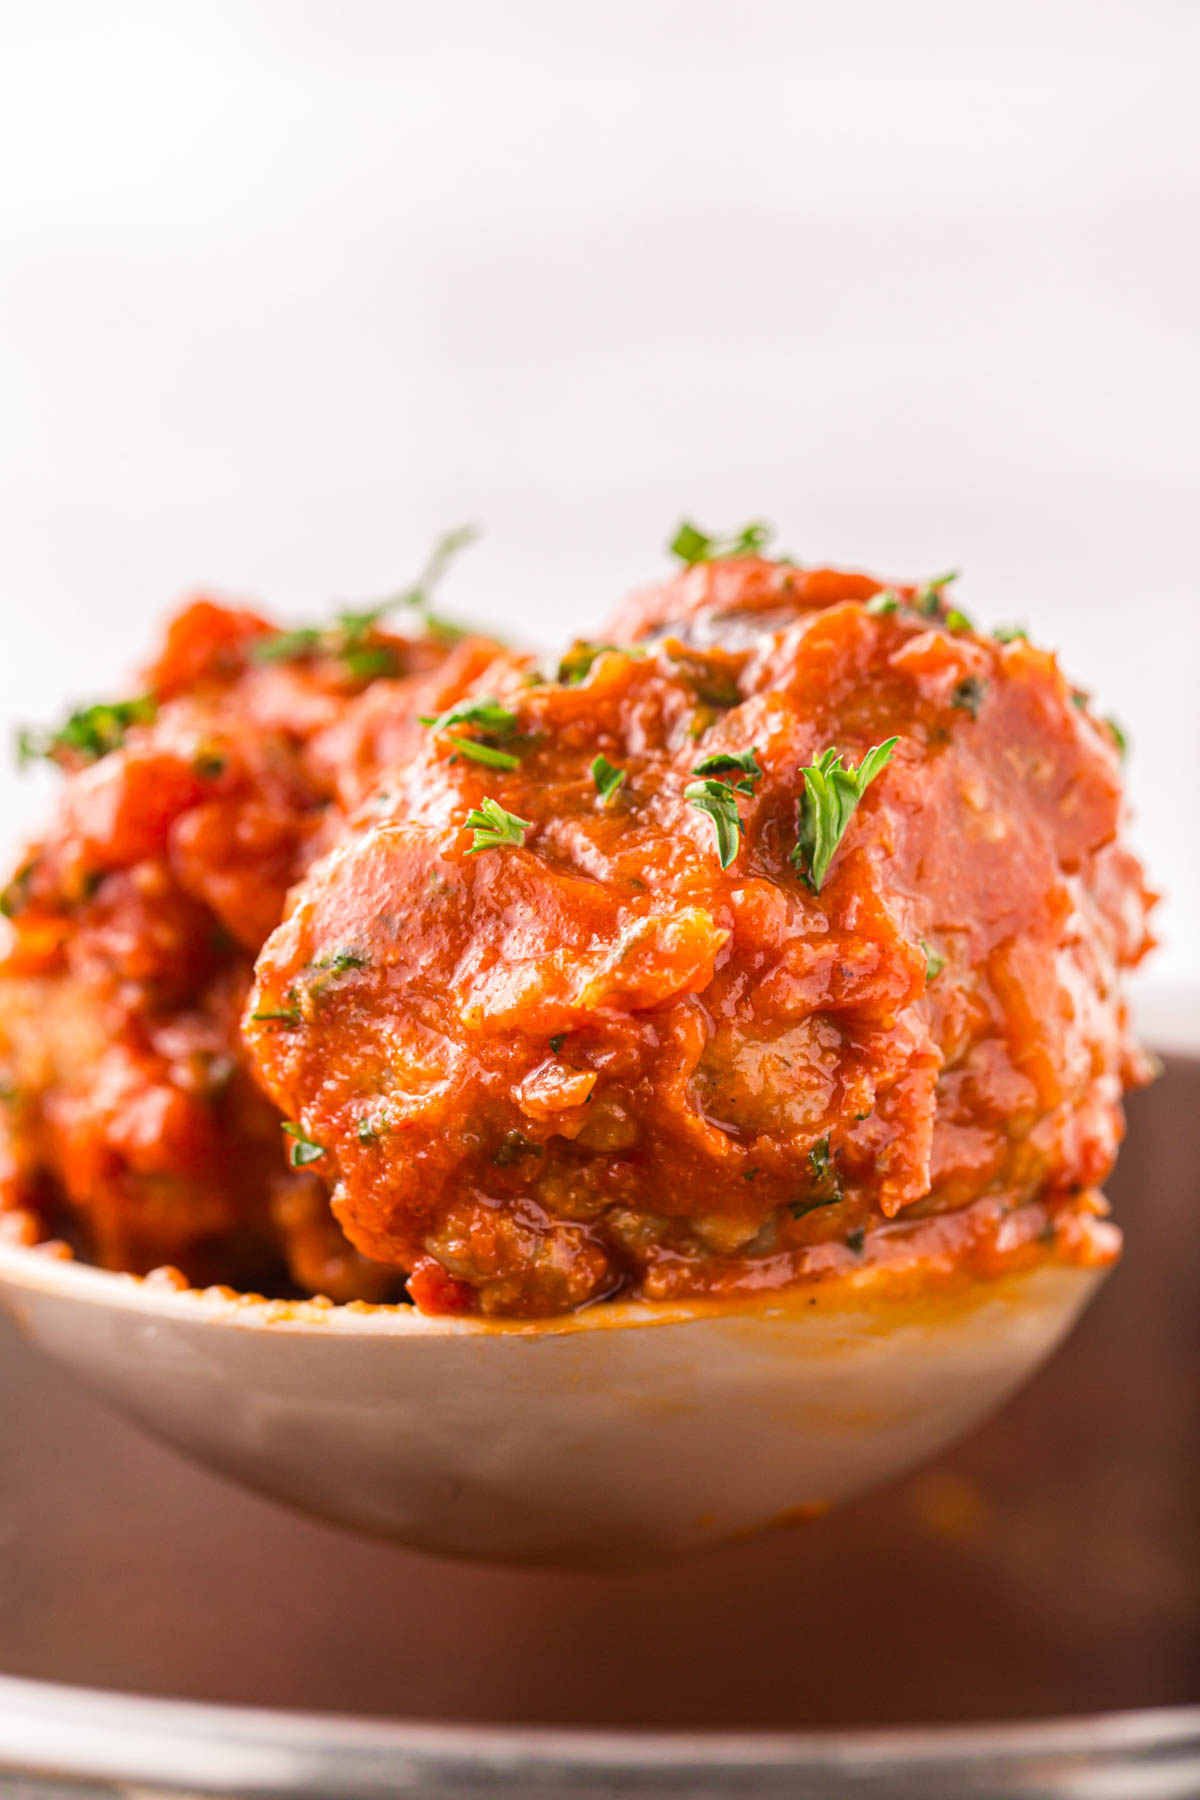 A spoonful of meatballs and sauce.